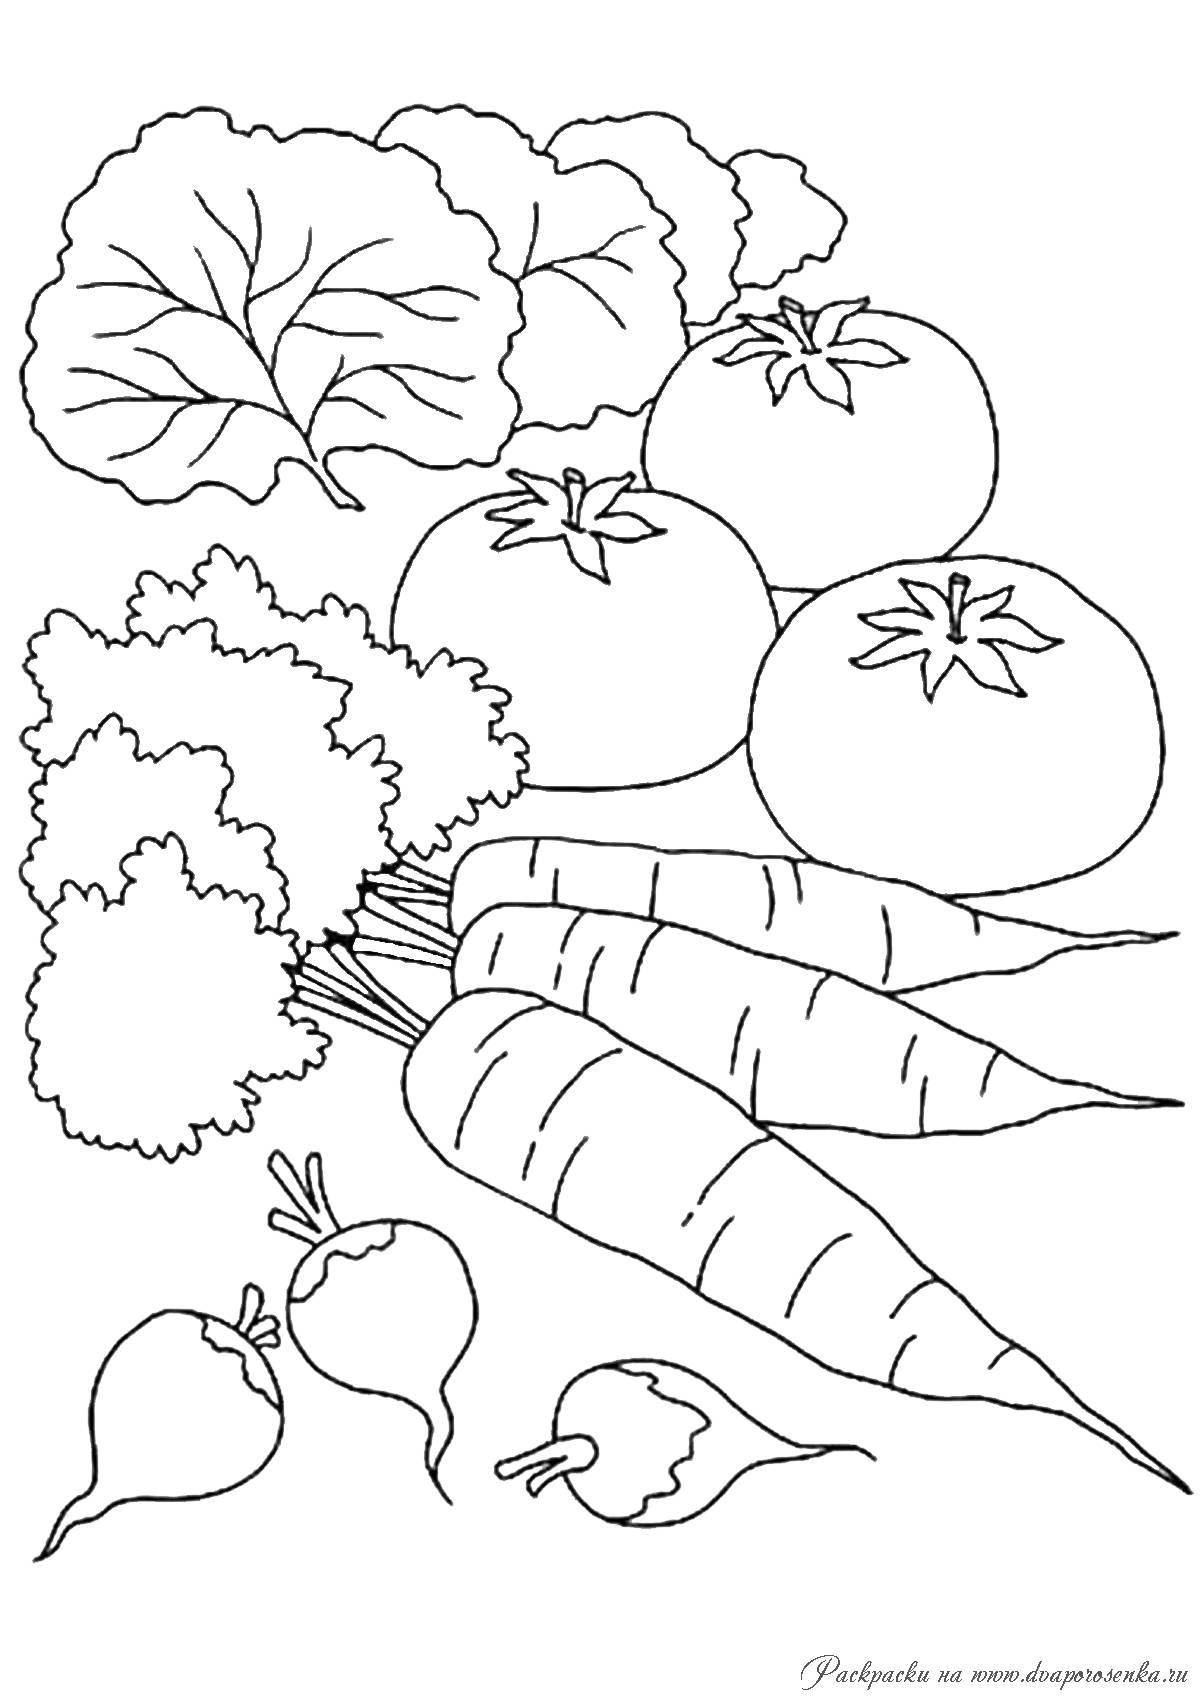 Fun coloring of vegetables for children